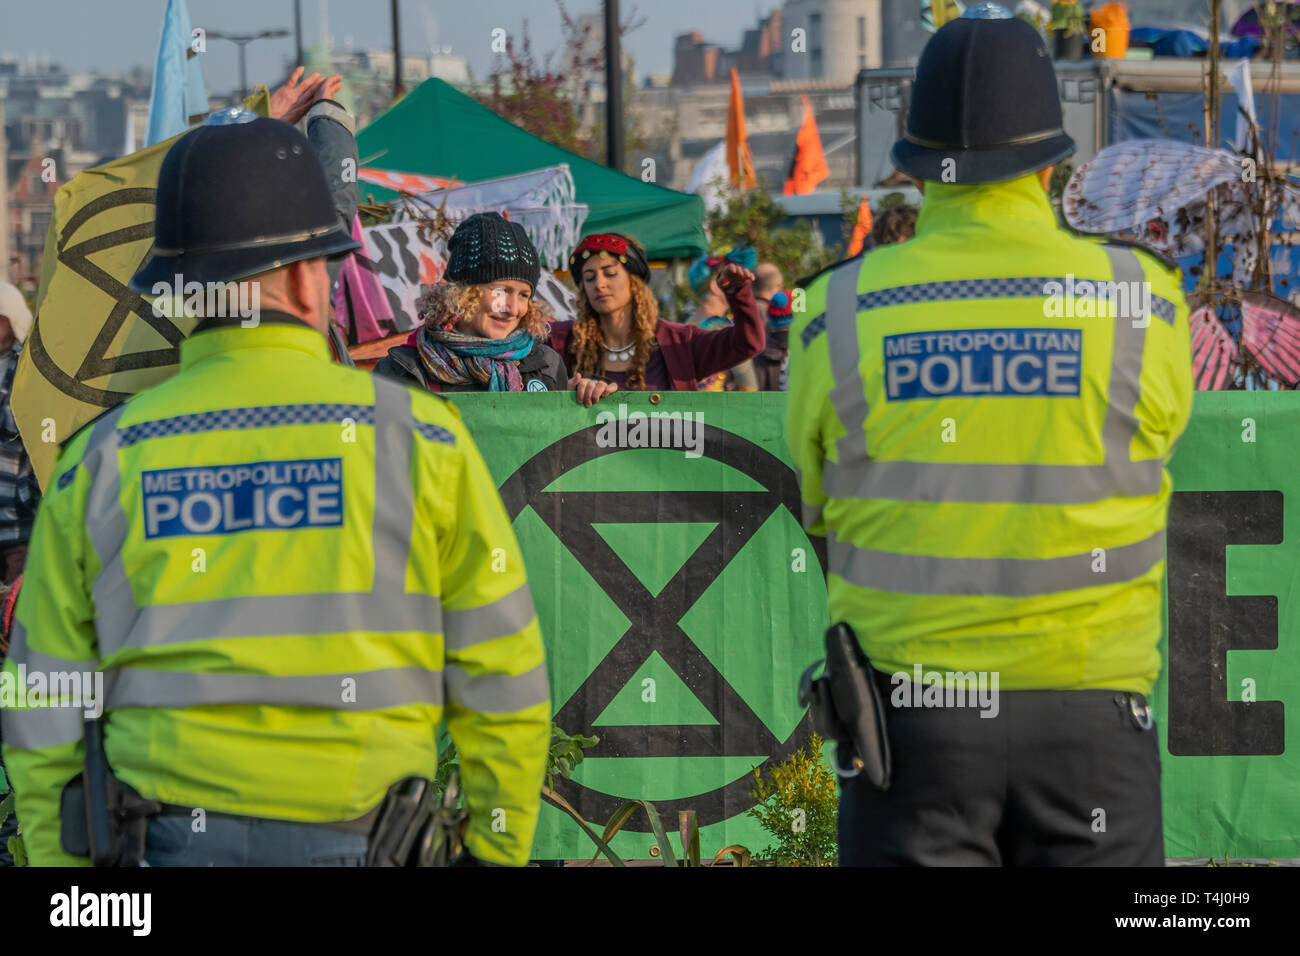 London, UK. 17th Apr 2019. Already the banners of the road block are up and the police in place - Morning on Waterloo Bridge sees the camp awake and commuters make their progress on foot and bike across the river - Day 3 - Protestors from Extinction Rebellion block several junctions in London as part of their ongoing protest to demand action by the UK Government on the 'climate chrisis'. The action is part of an international co-ordinated protest. Credit: Guy Bell/Alamy Live News Stock Photo